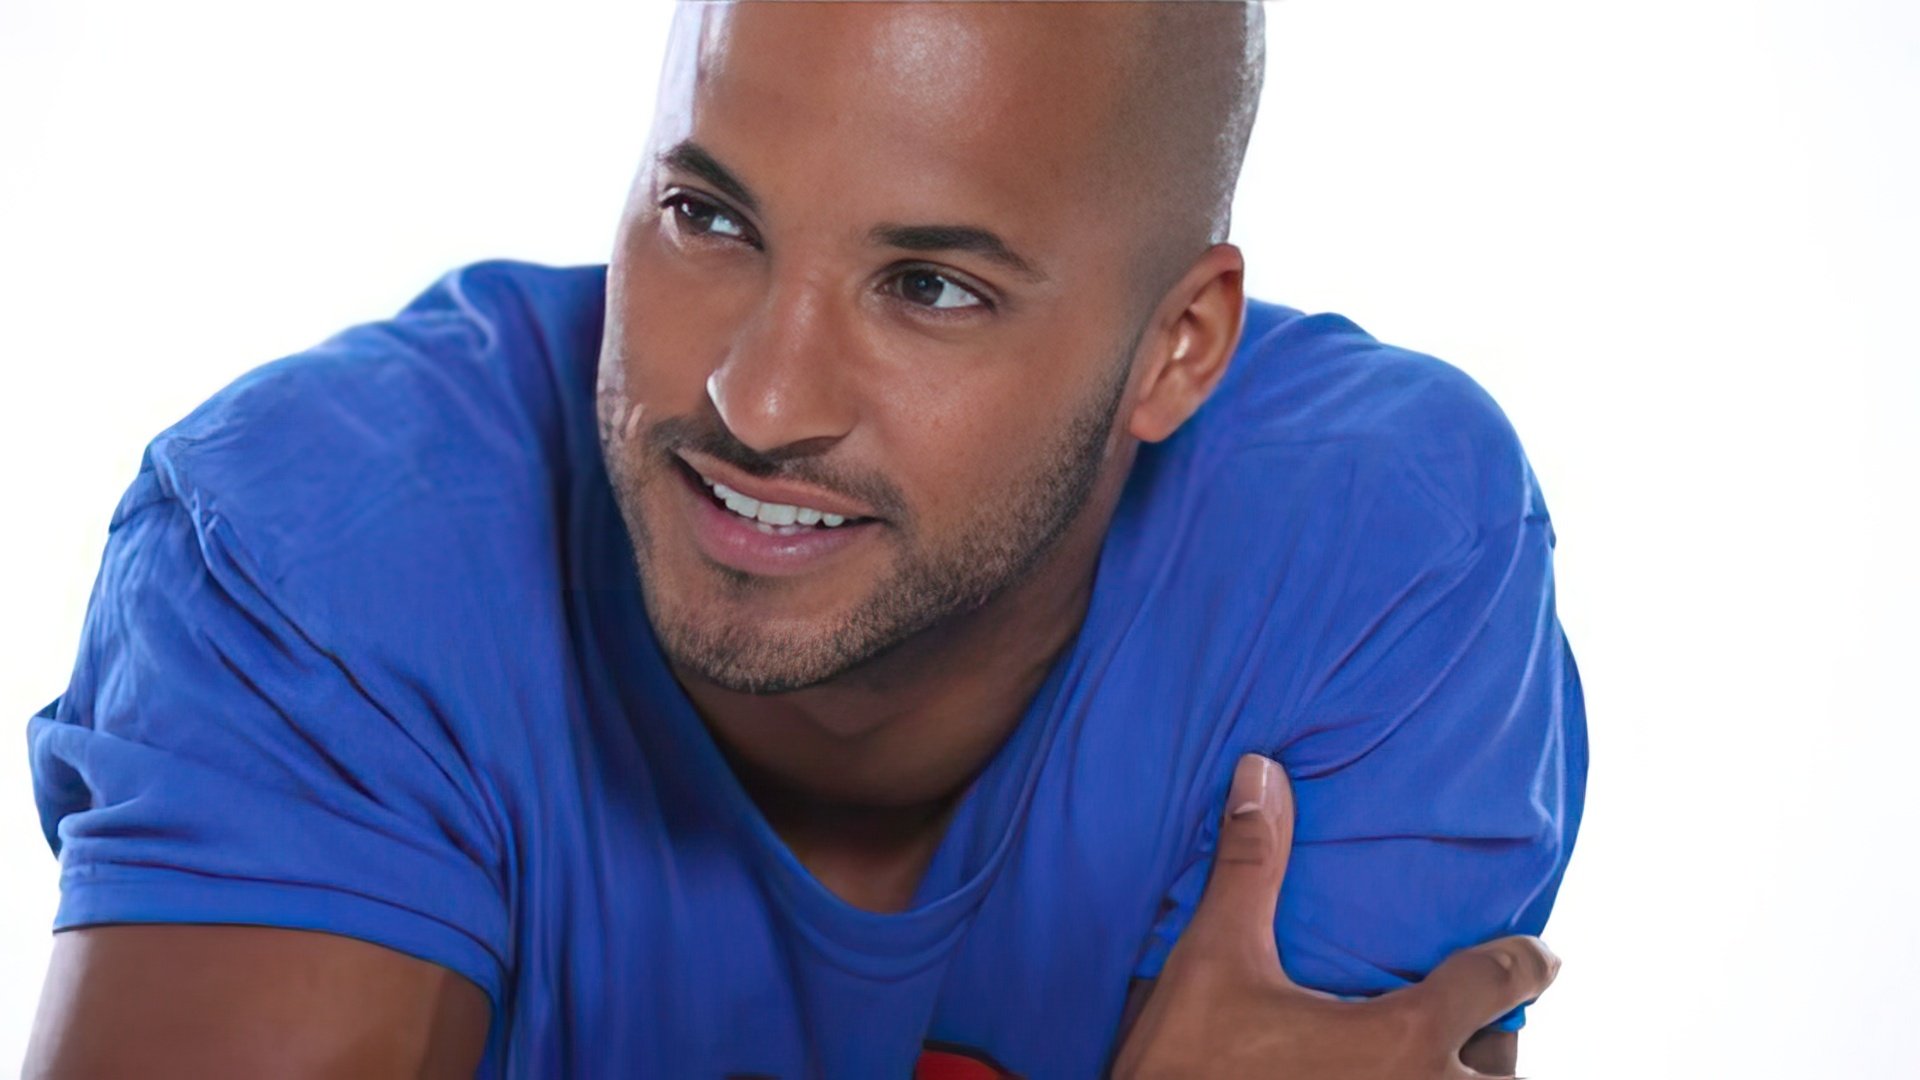 Actor Ricky Whittle